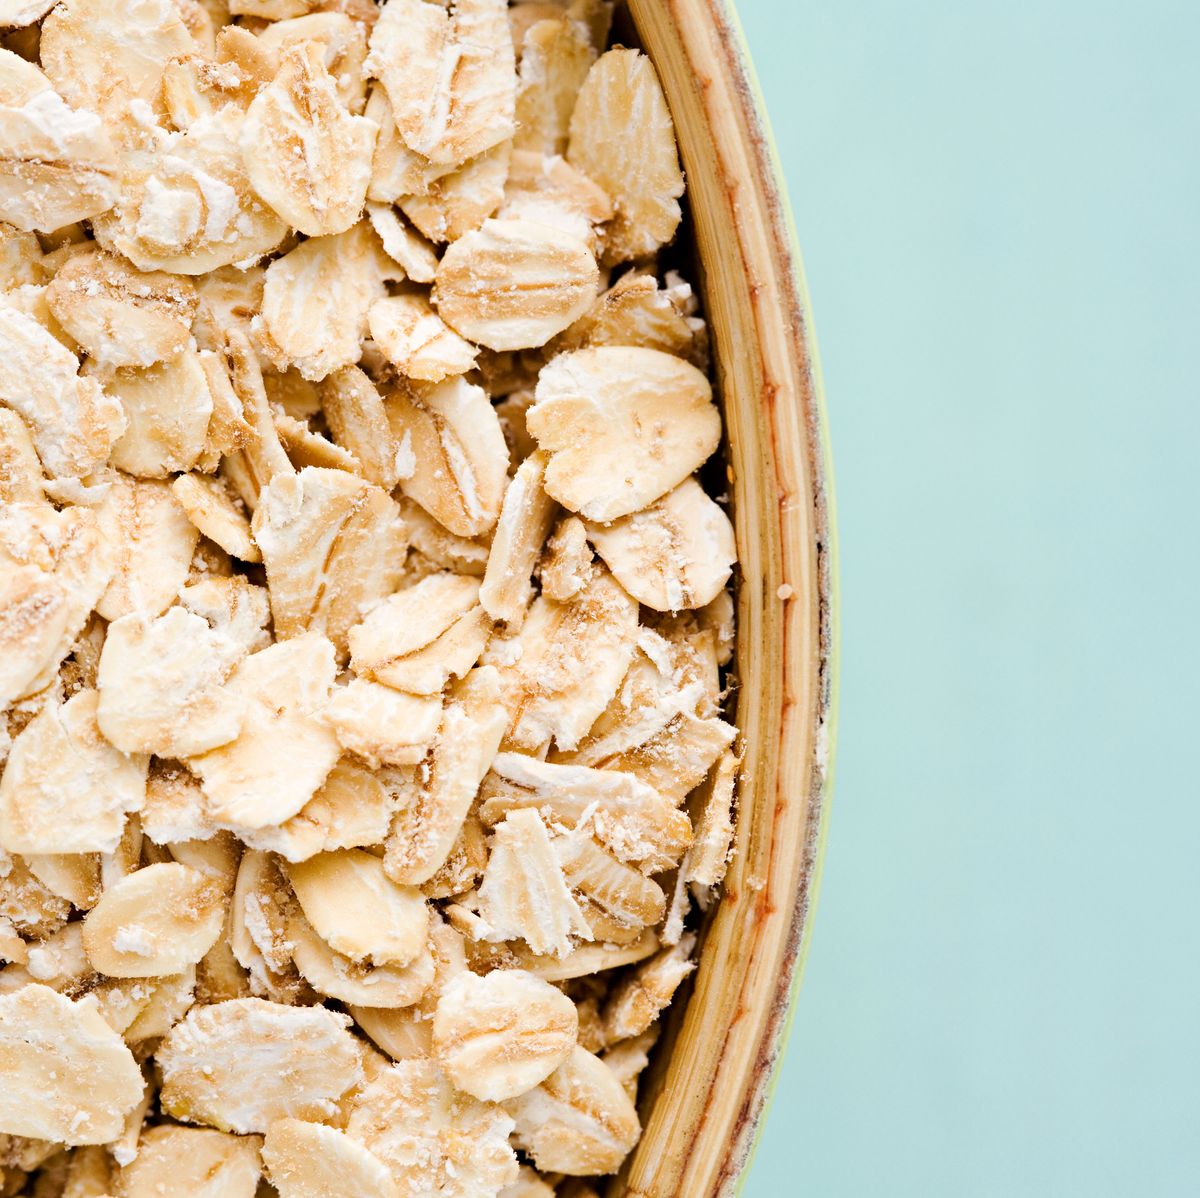 Oatmeal Nutrition and Health Benefits - Is Oatmeal Healthy?